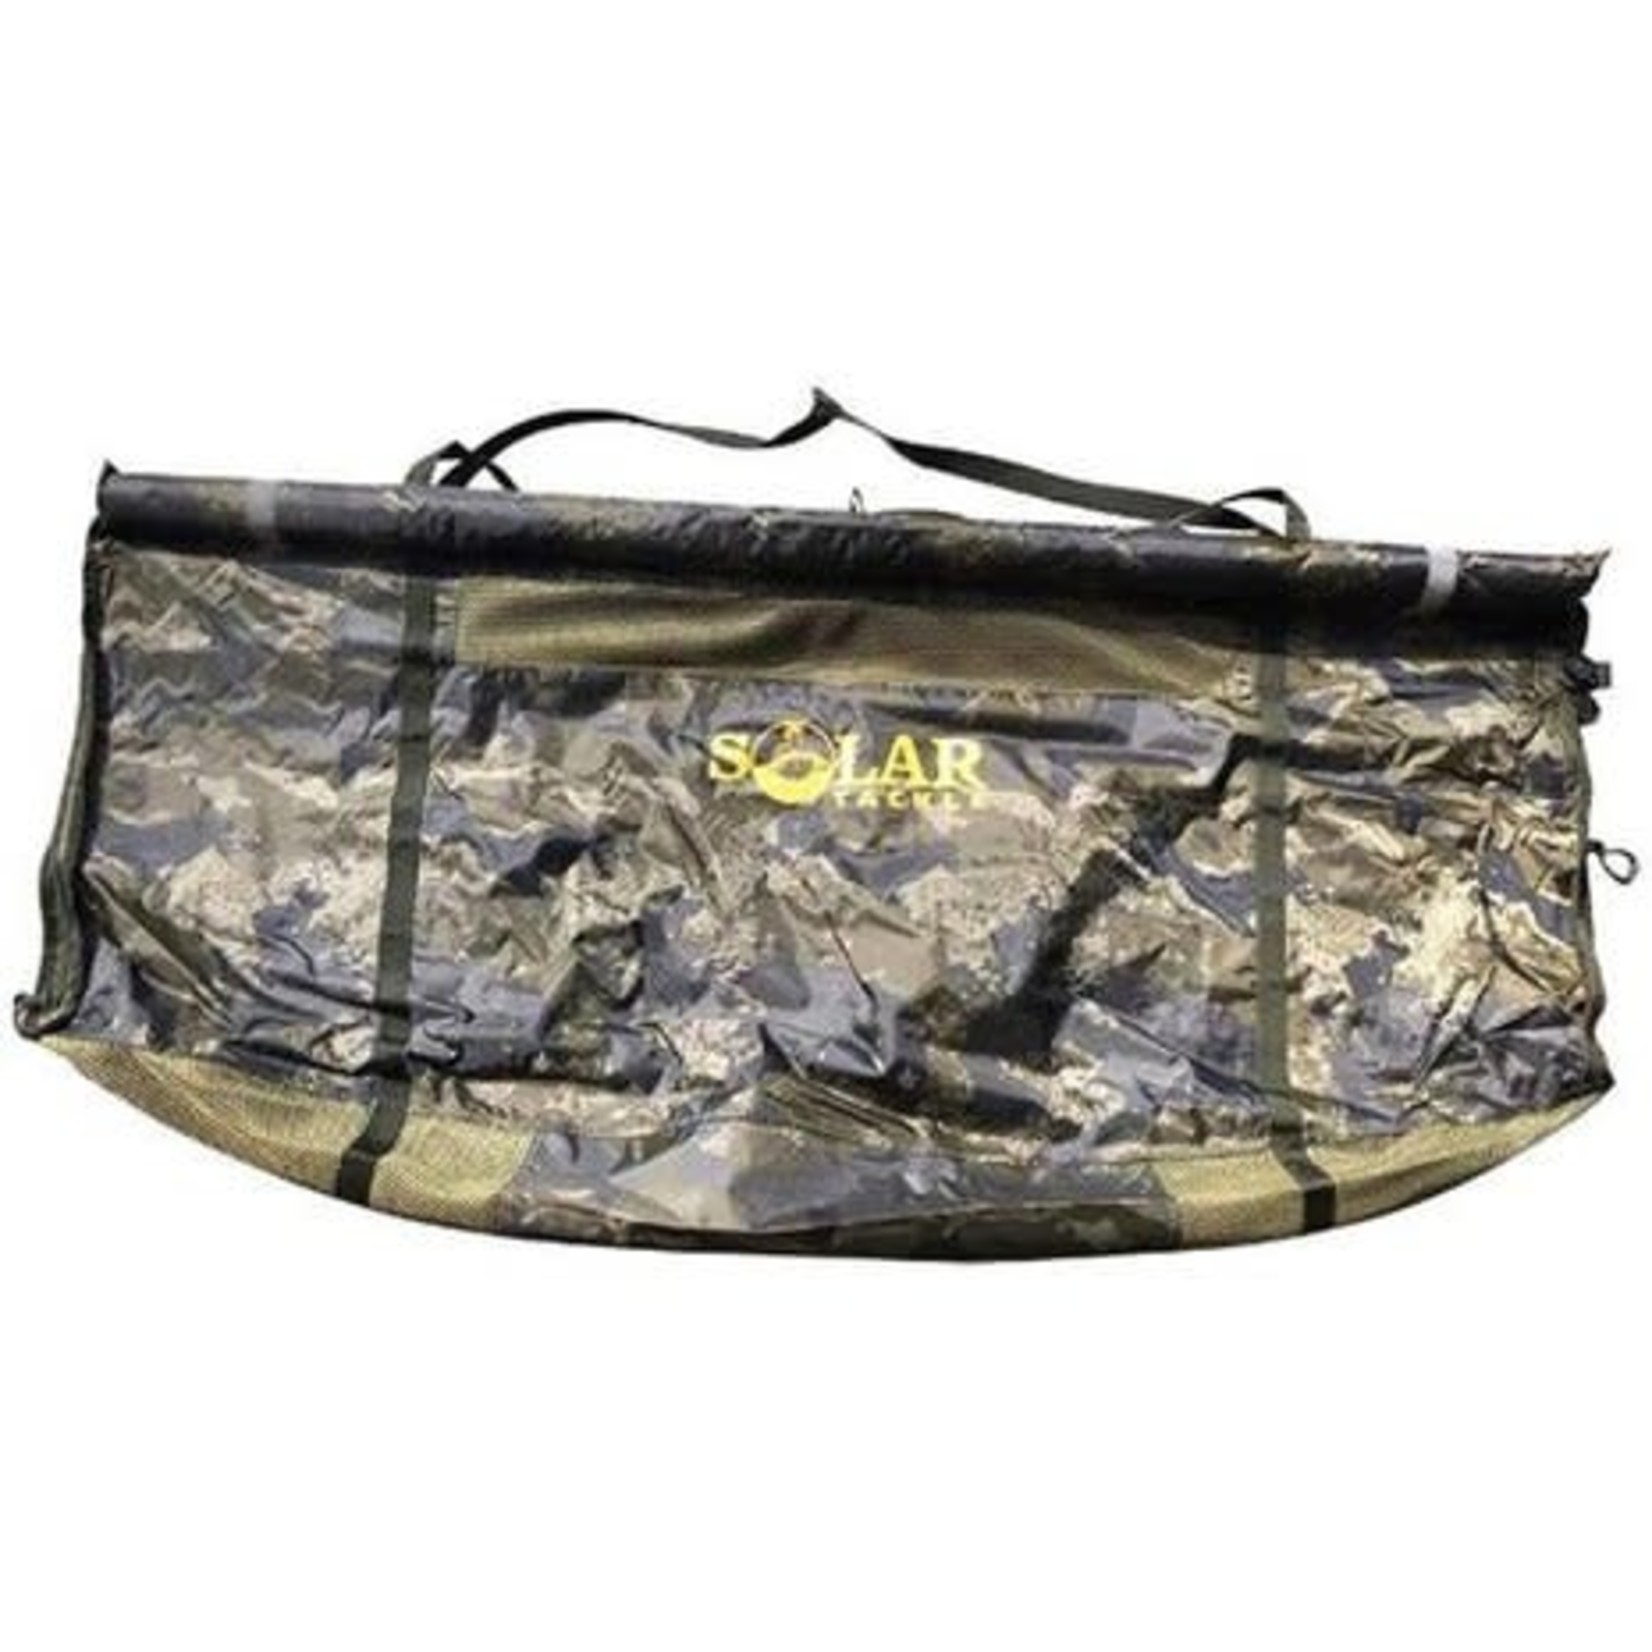 SOLAR SOLAR UNDERCOVER CAMO WEIGH/RETAINER SLING - LARGE